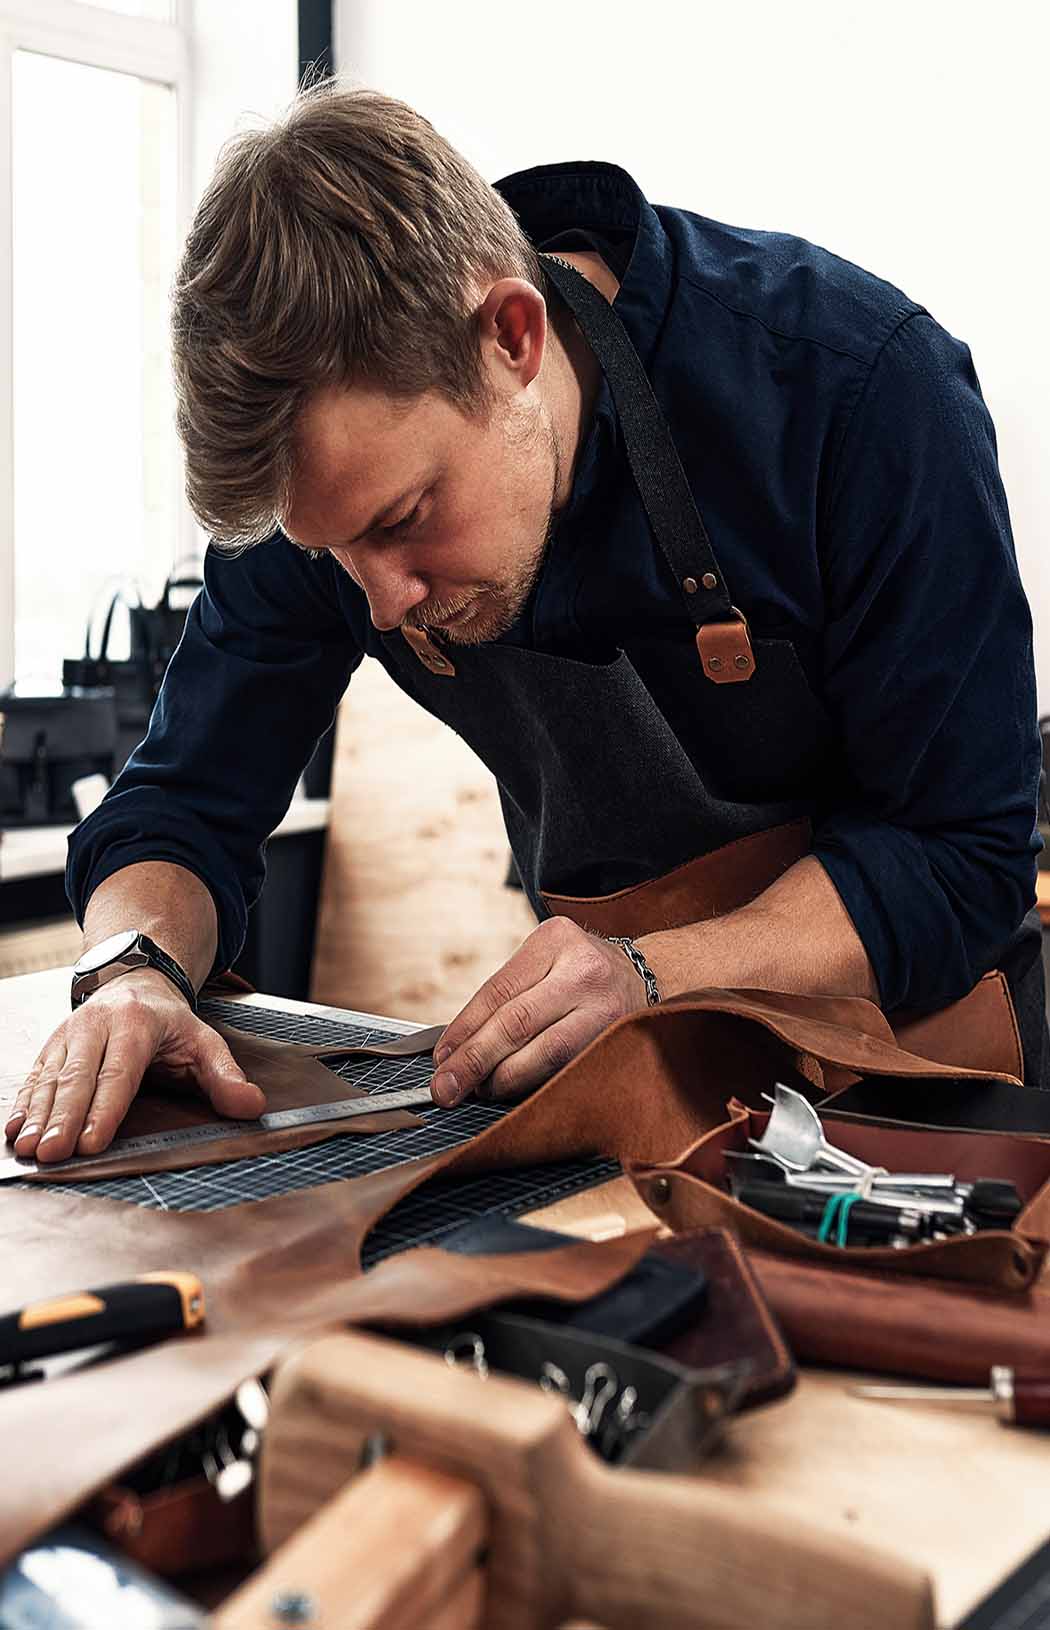 leather-craftsmen-working-making-measupenets-in-patterns-at-table-in-workshop-studio